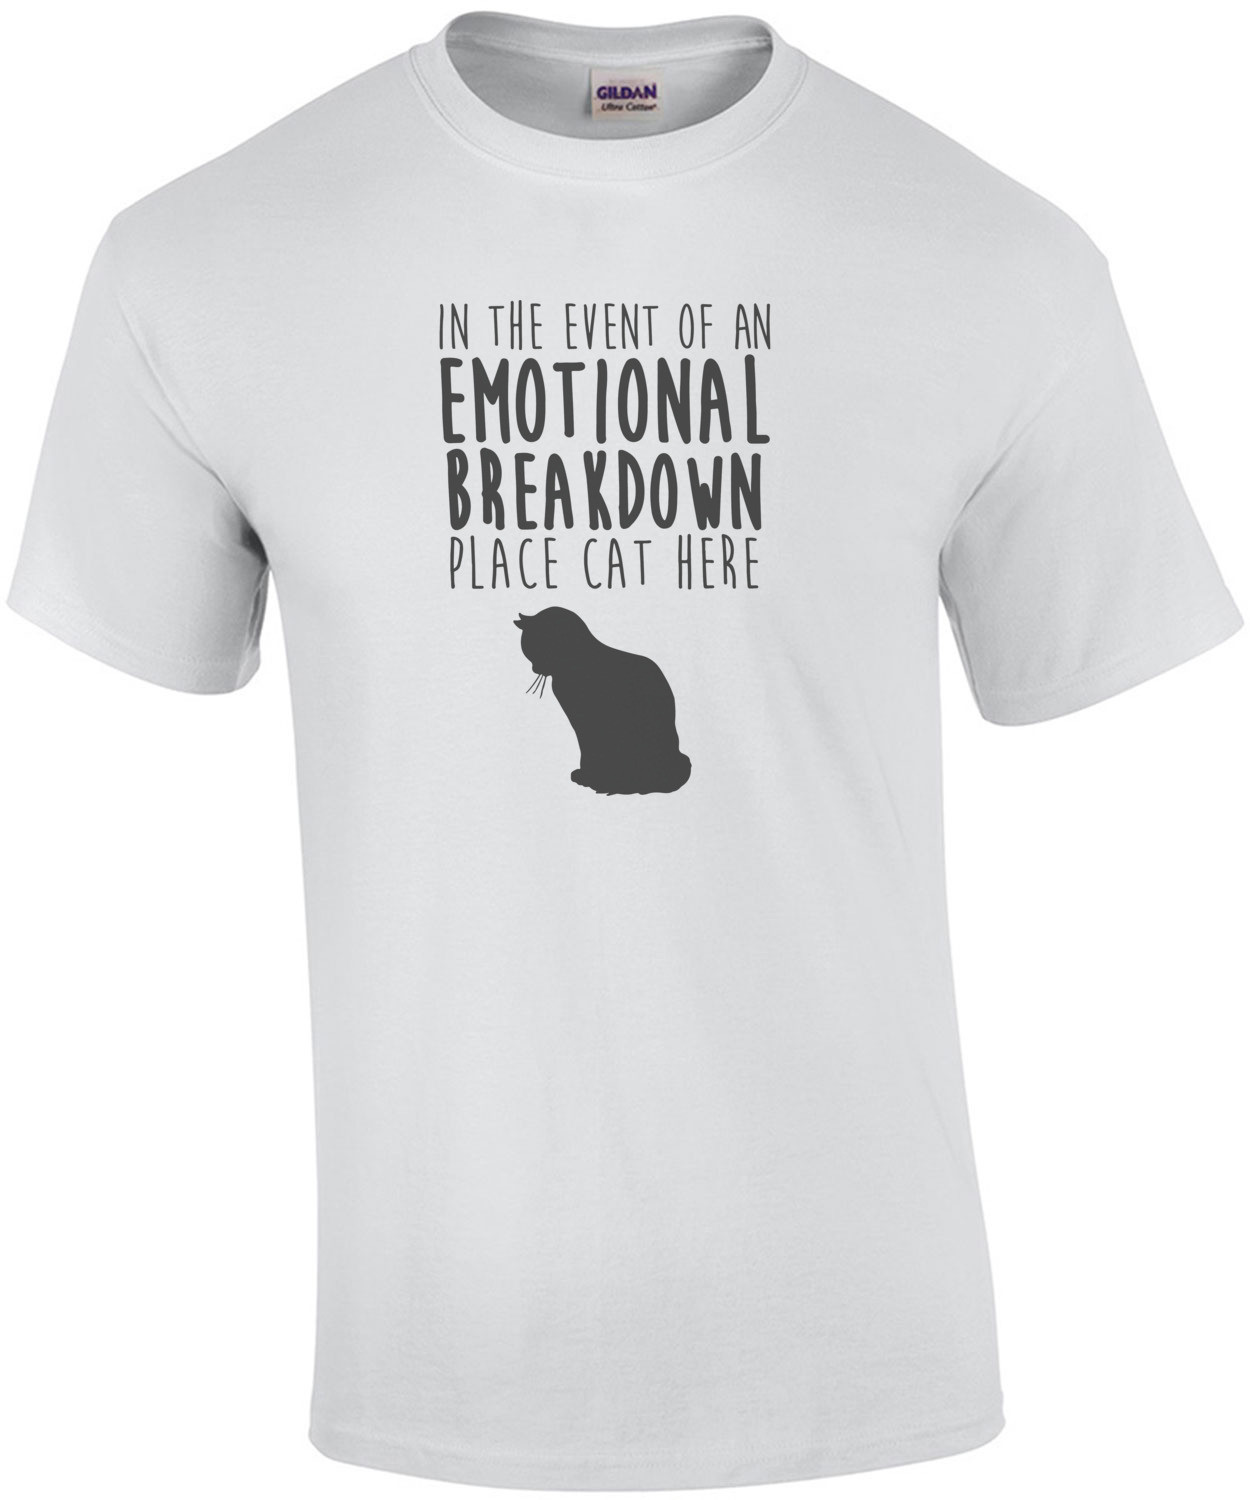 In the event of an emotional breakdown place cat here t-shirt